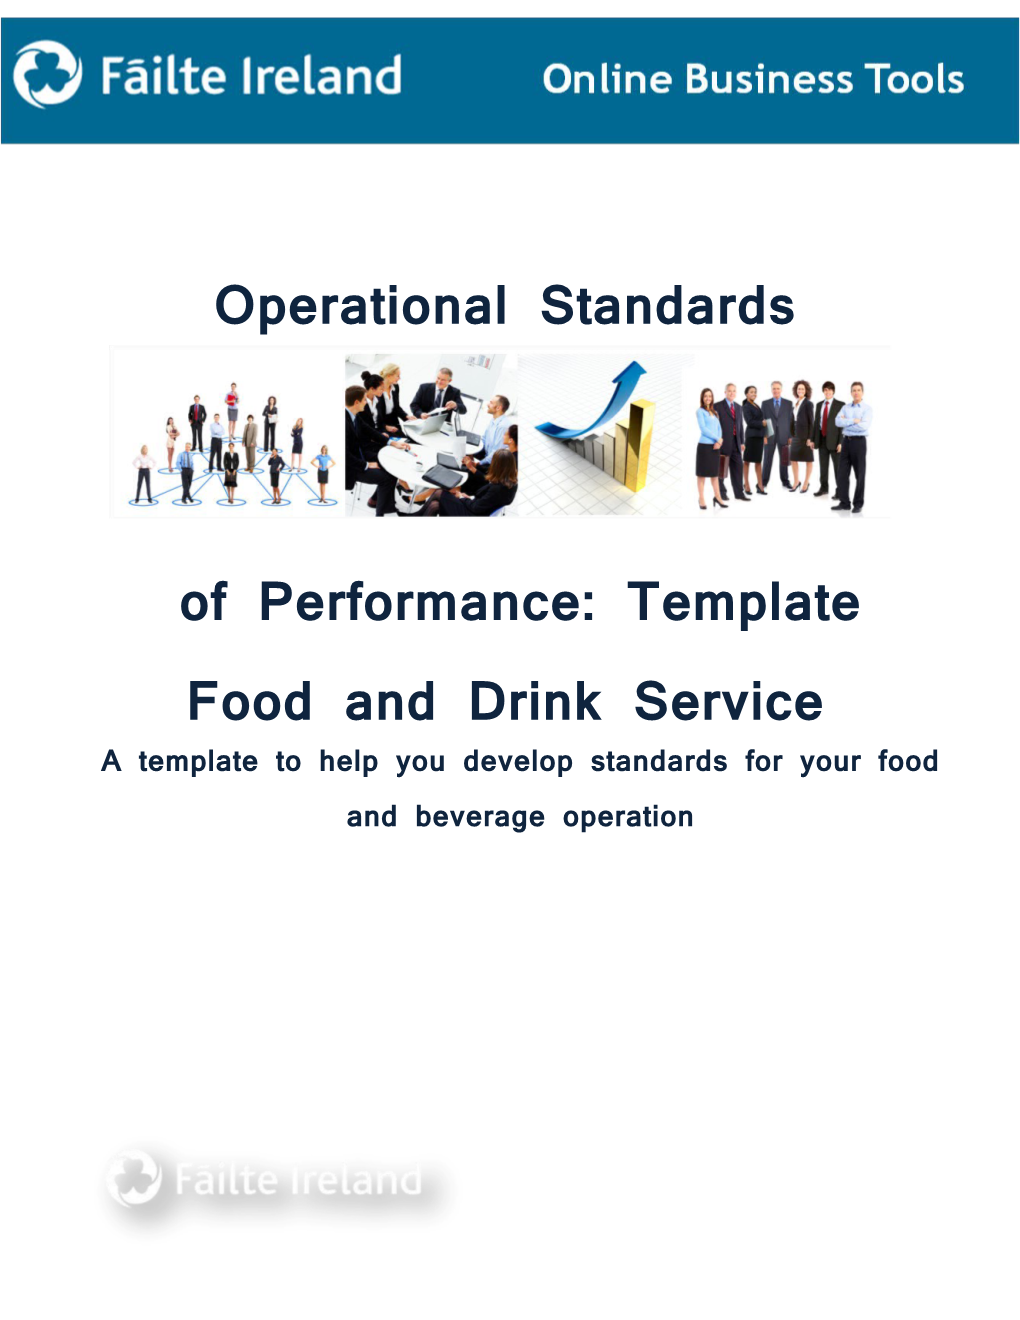 Template: Food and Drink Service